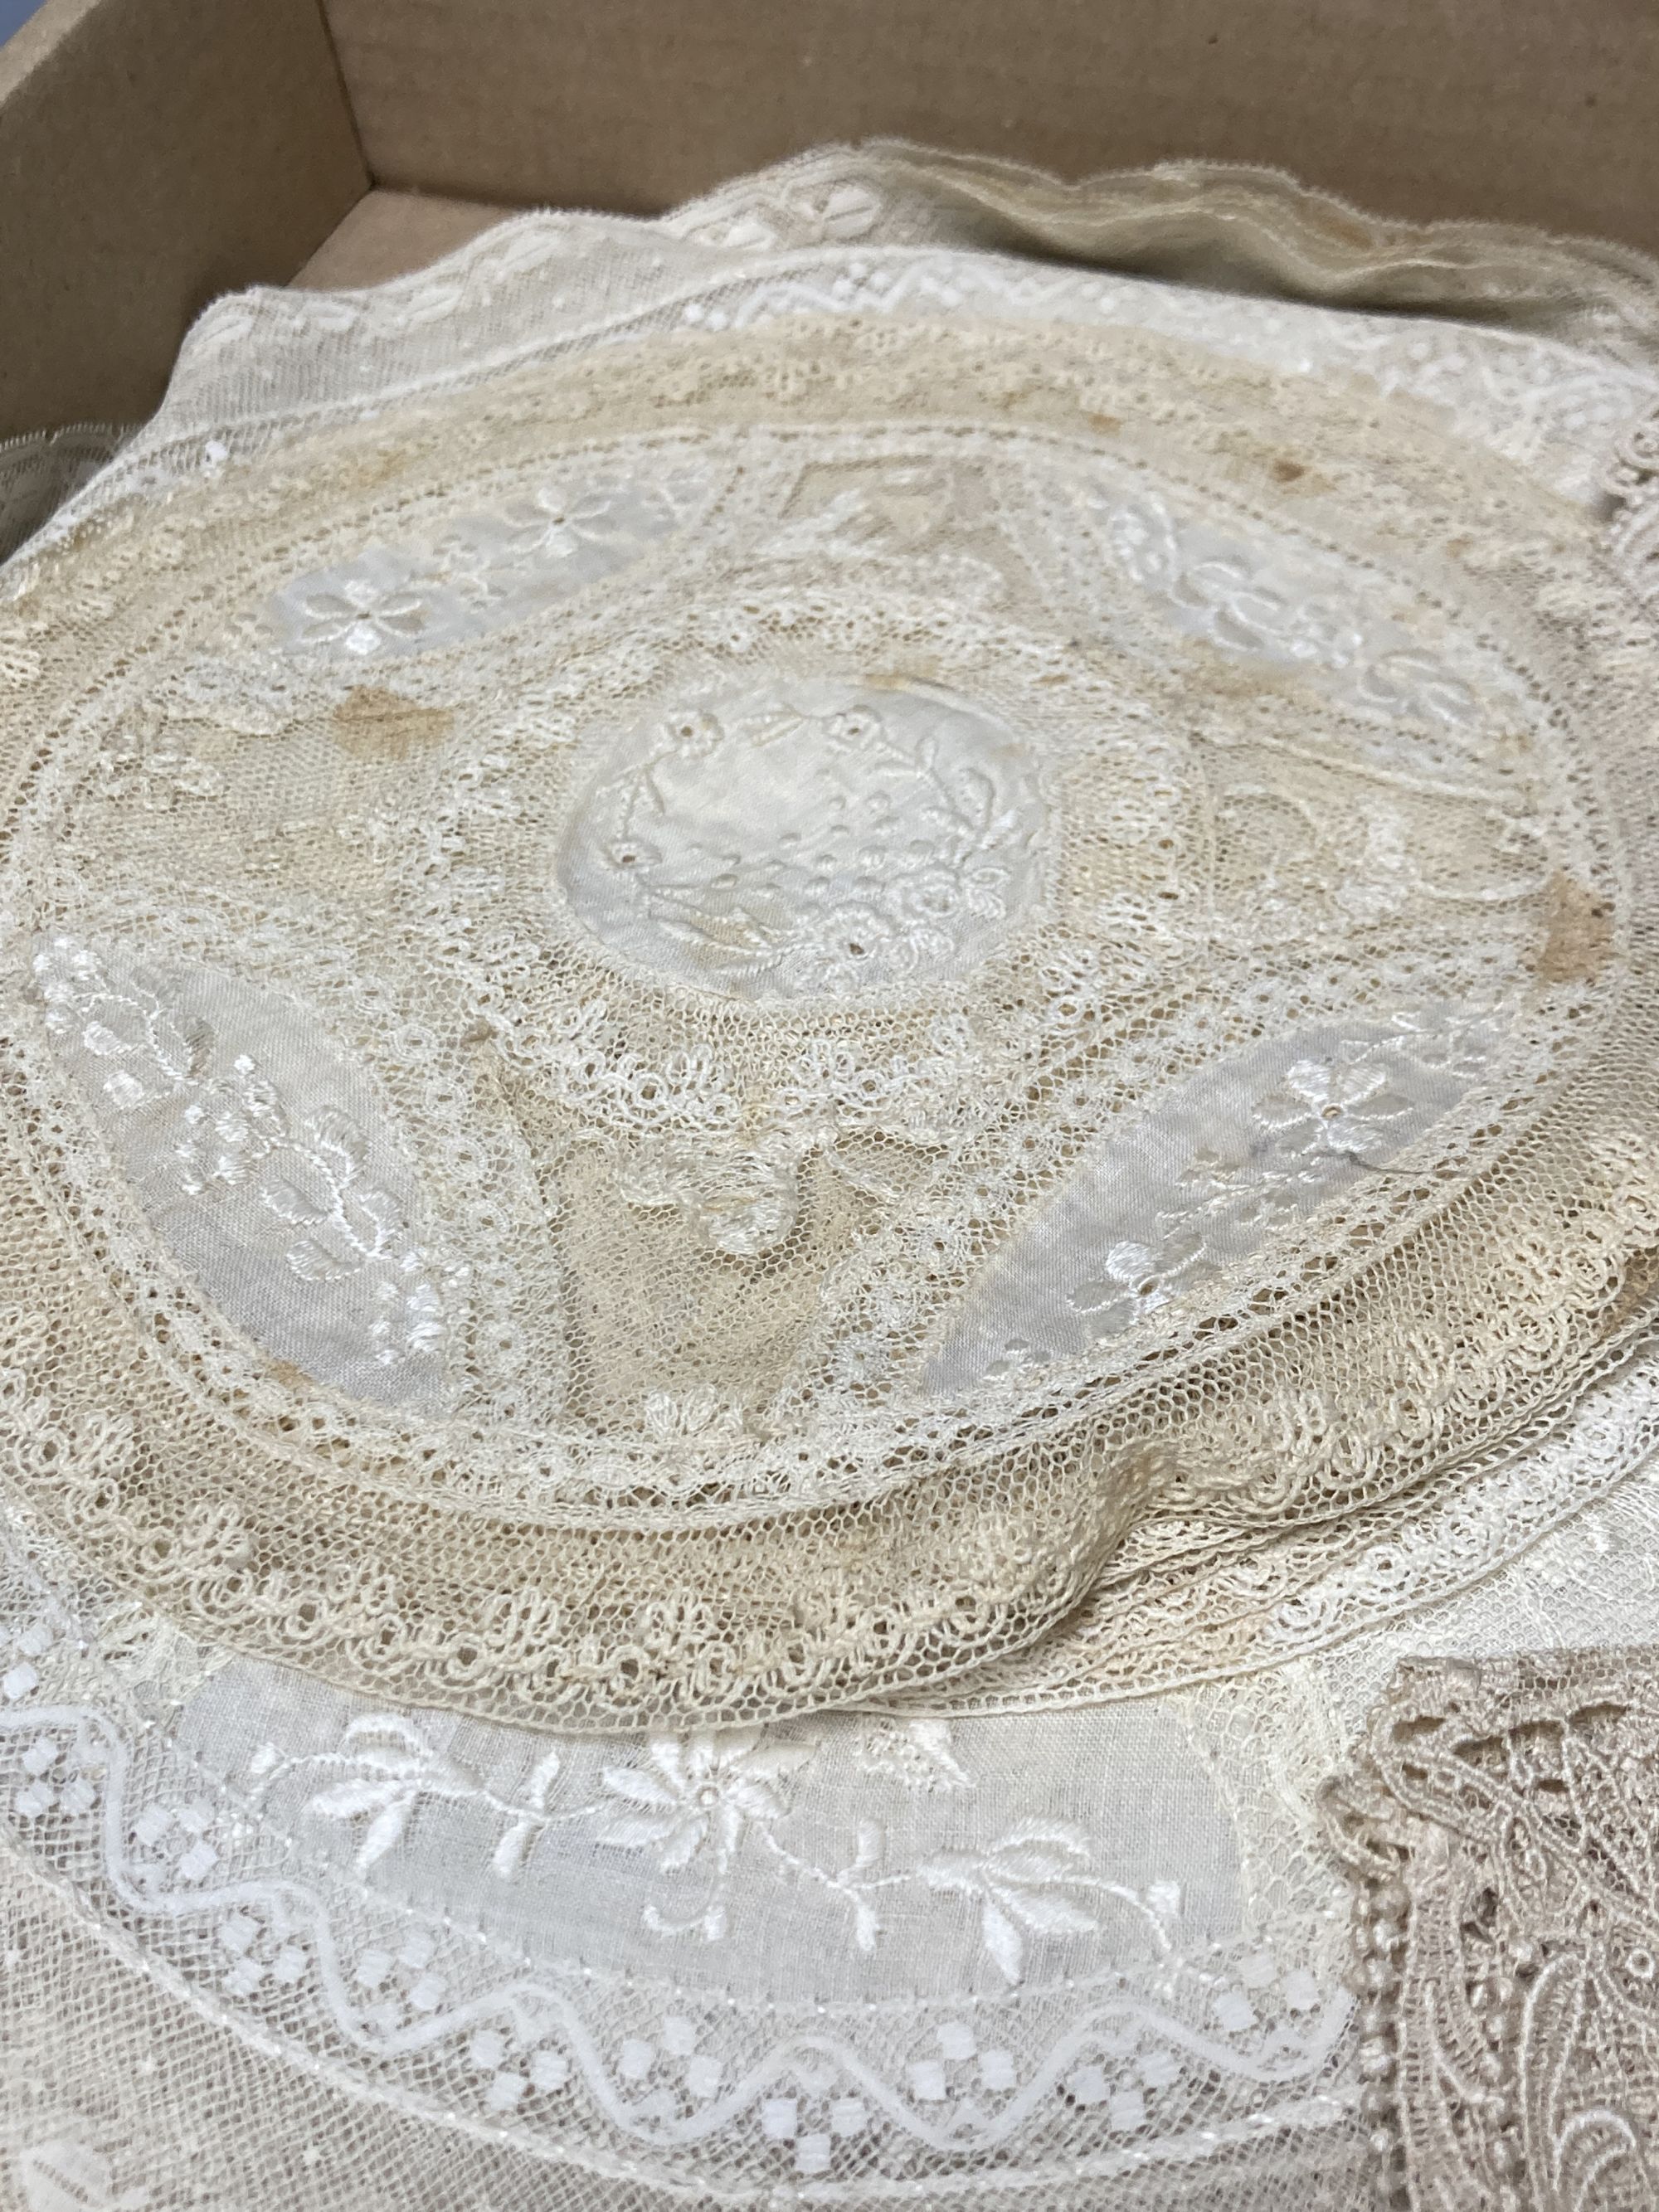 A set of Normandy lace table mats and assorted mats